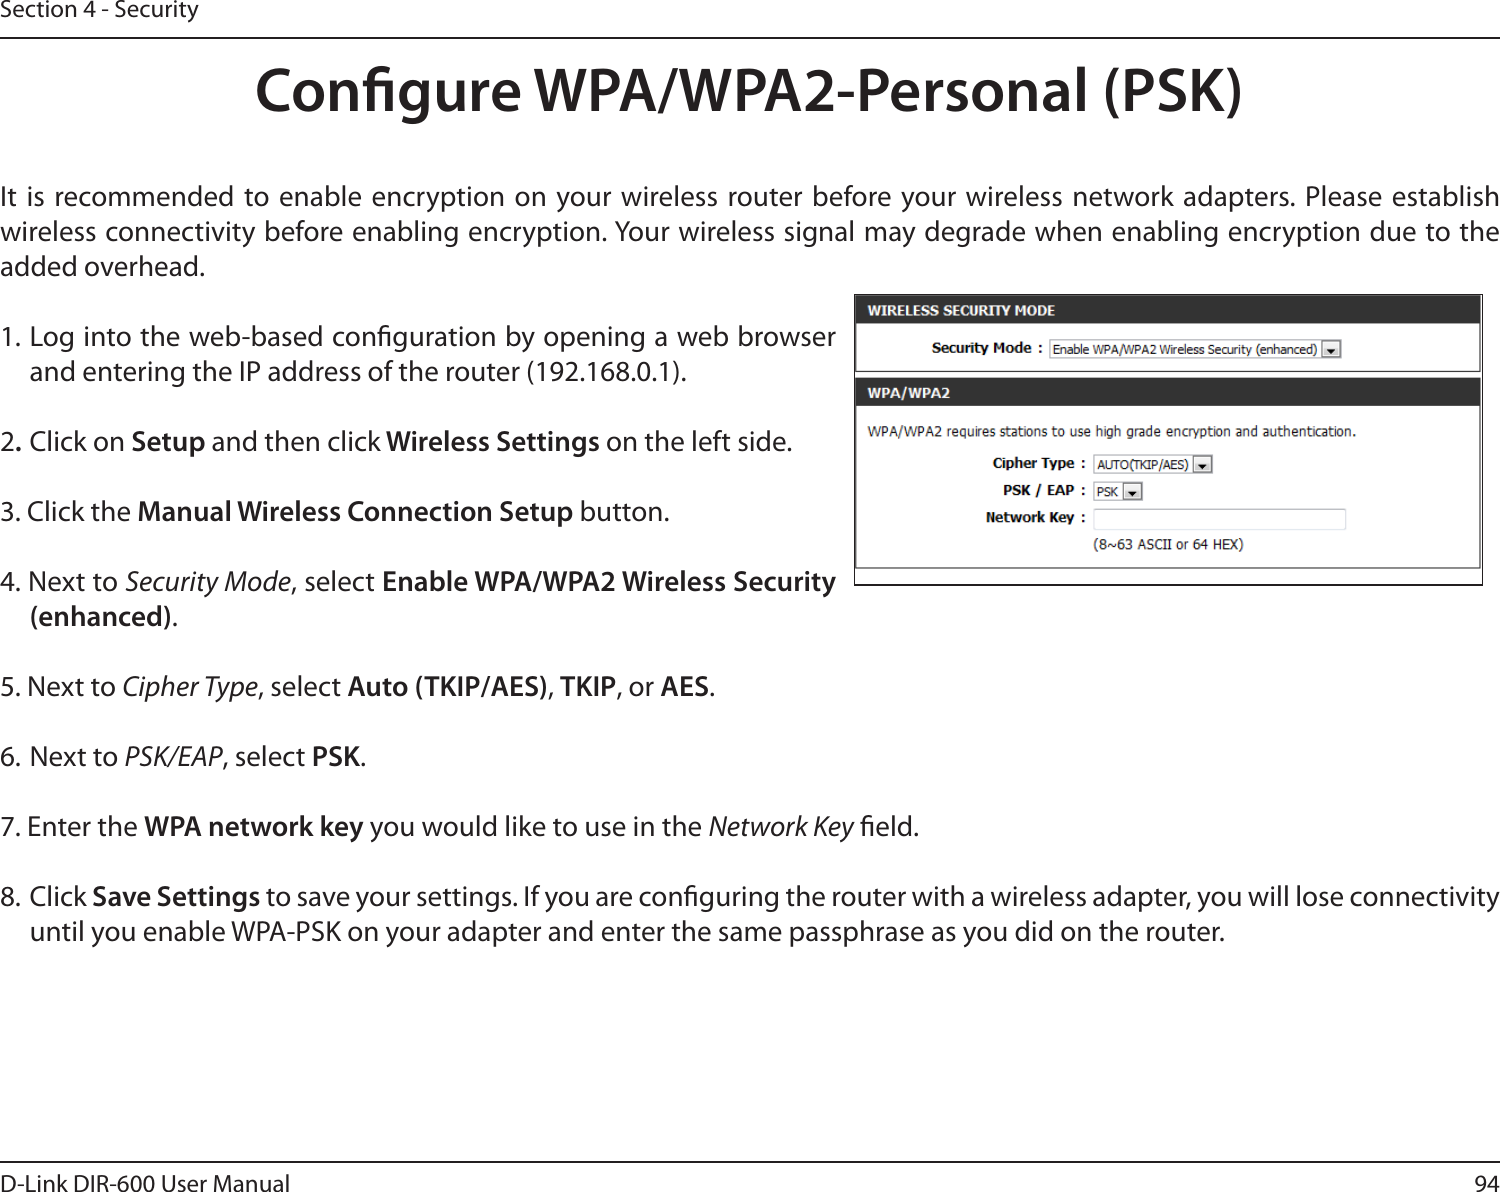 94D-Link DIR-600 User ManualSection 4 - SecurityCongure WPA/WPA2-Personal (PSK)It  is recommended to enable  encryption on your wireless router before your wireless network adapters. Please establish wireless connectivity before enabling encryption. Your wireless signal may degrade when enabling encryption due to the added overhead.1. Log into the web-based conguration by opening a web browser and entering the IP address of the router (192.168.0.1).  2. Click on Setup and then click Wireless Settings on the left side.3. Click the Manual Wireless Connection Setup button. 4. Next to Security Mode, select Enable WPA/WPA2 Wireless Security (enhanced).5. Next to Cipher Type, select Auto (TKIP/AES), TKIP, or AES.6. Next to PSK/EAP, select PSK.7. Enter the WPA network key you would like to use in the Network Key eld.8. Click Save Settings to save your settings. If you are conguring the router with a wireless adapter, you will lose connectivity until you enable WPA-PSK on your adapter and enter the same passphrase as you did on the router.